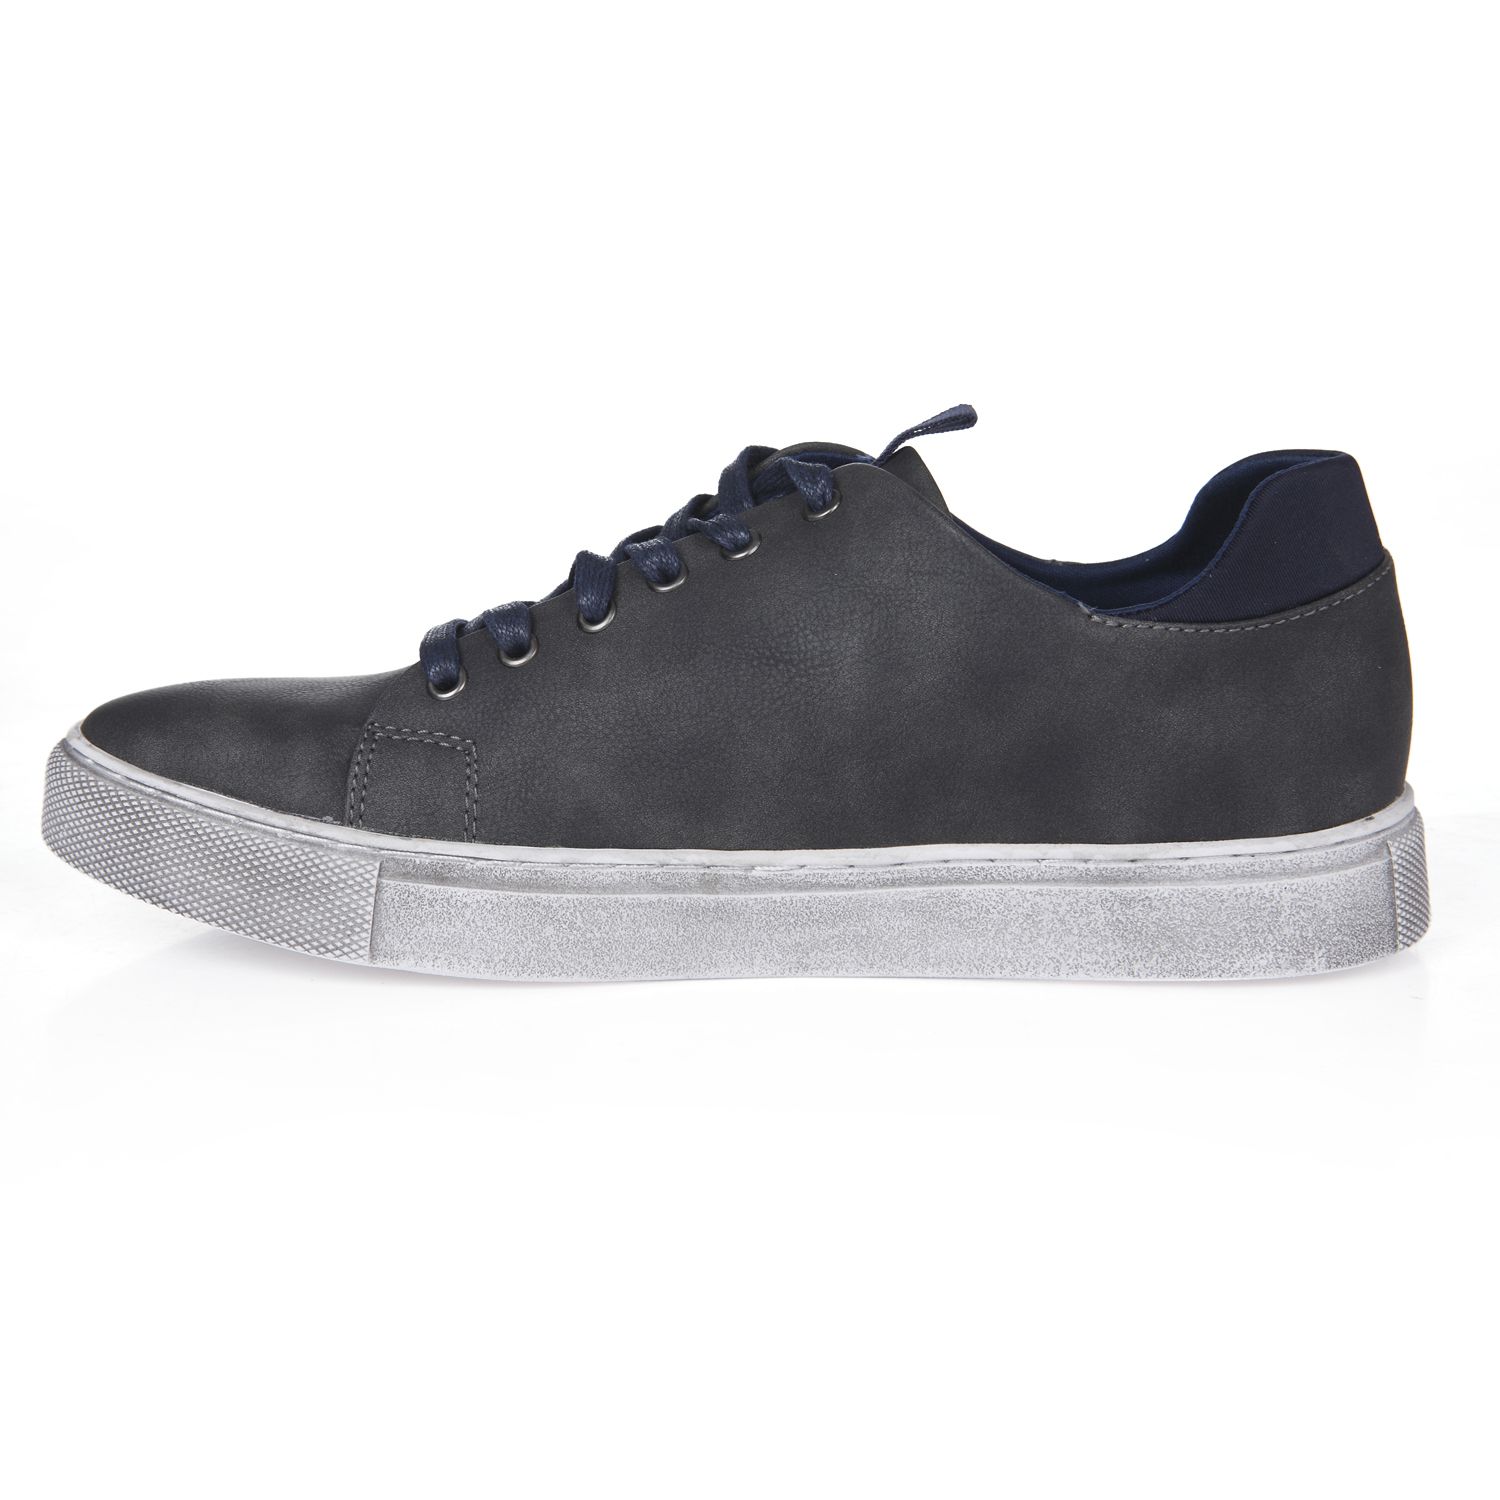 Mufti Grey Lace Up Shoes Gray Casual Shoes - Buy Mufti Grey Lace Up ...